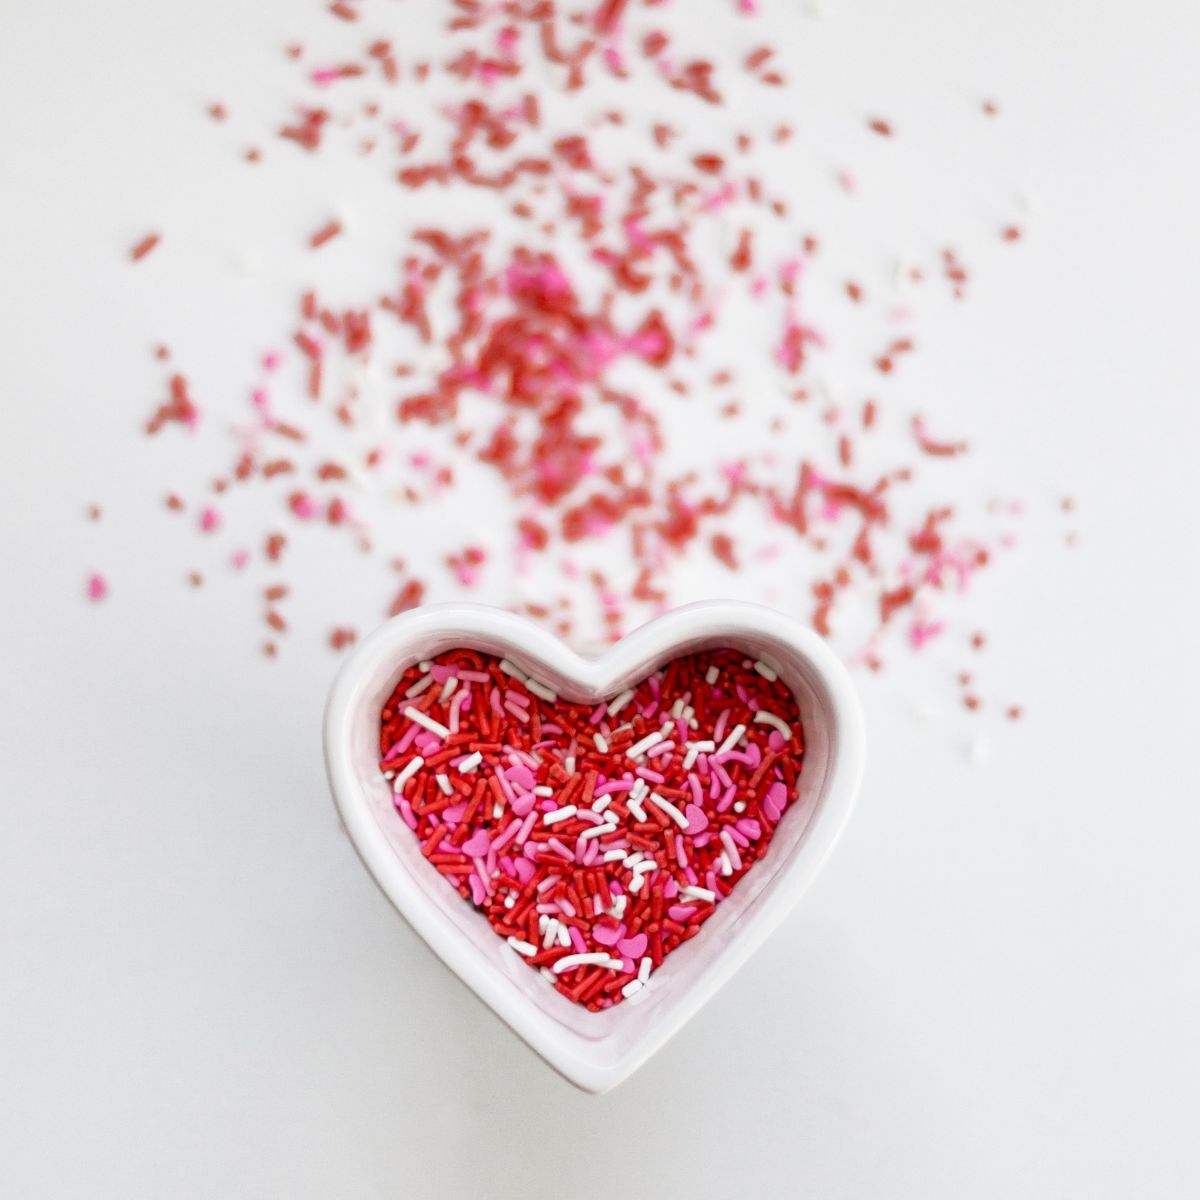 A heart shaped cup of red and pink sprinkles.